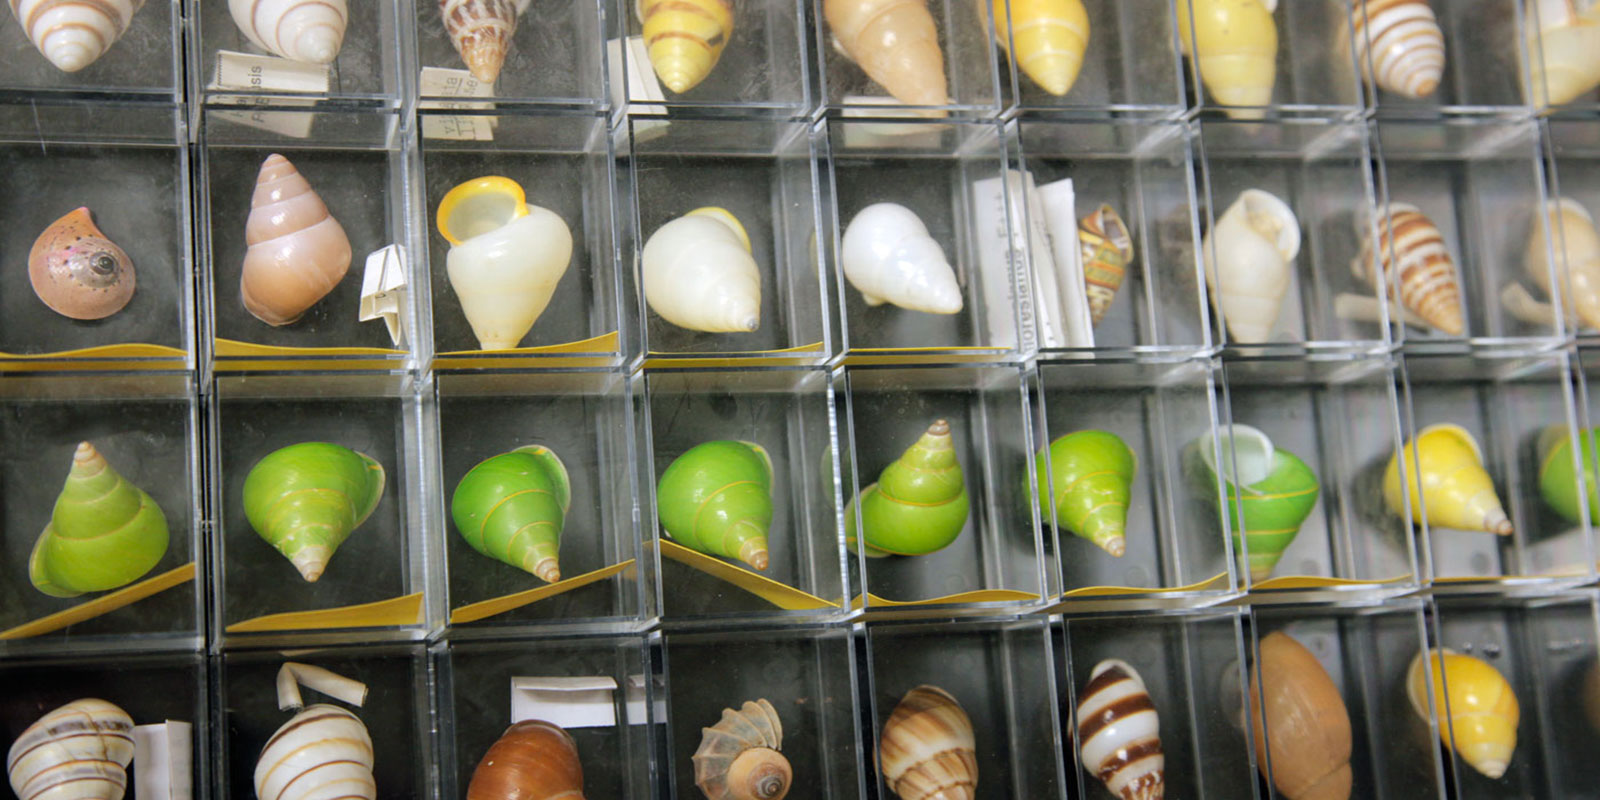 Rows of tiny shells all in individual storage boxes